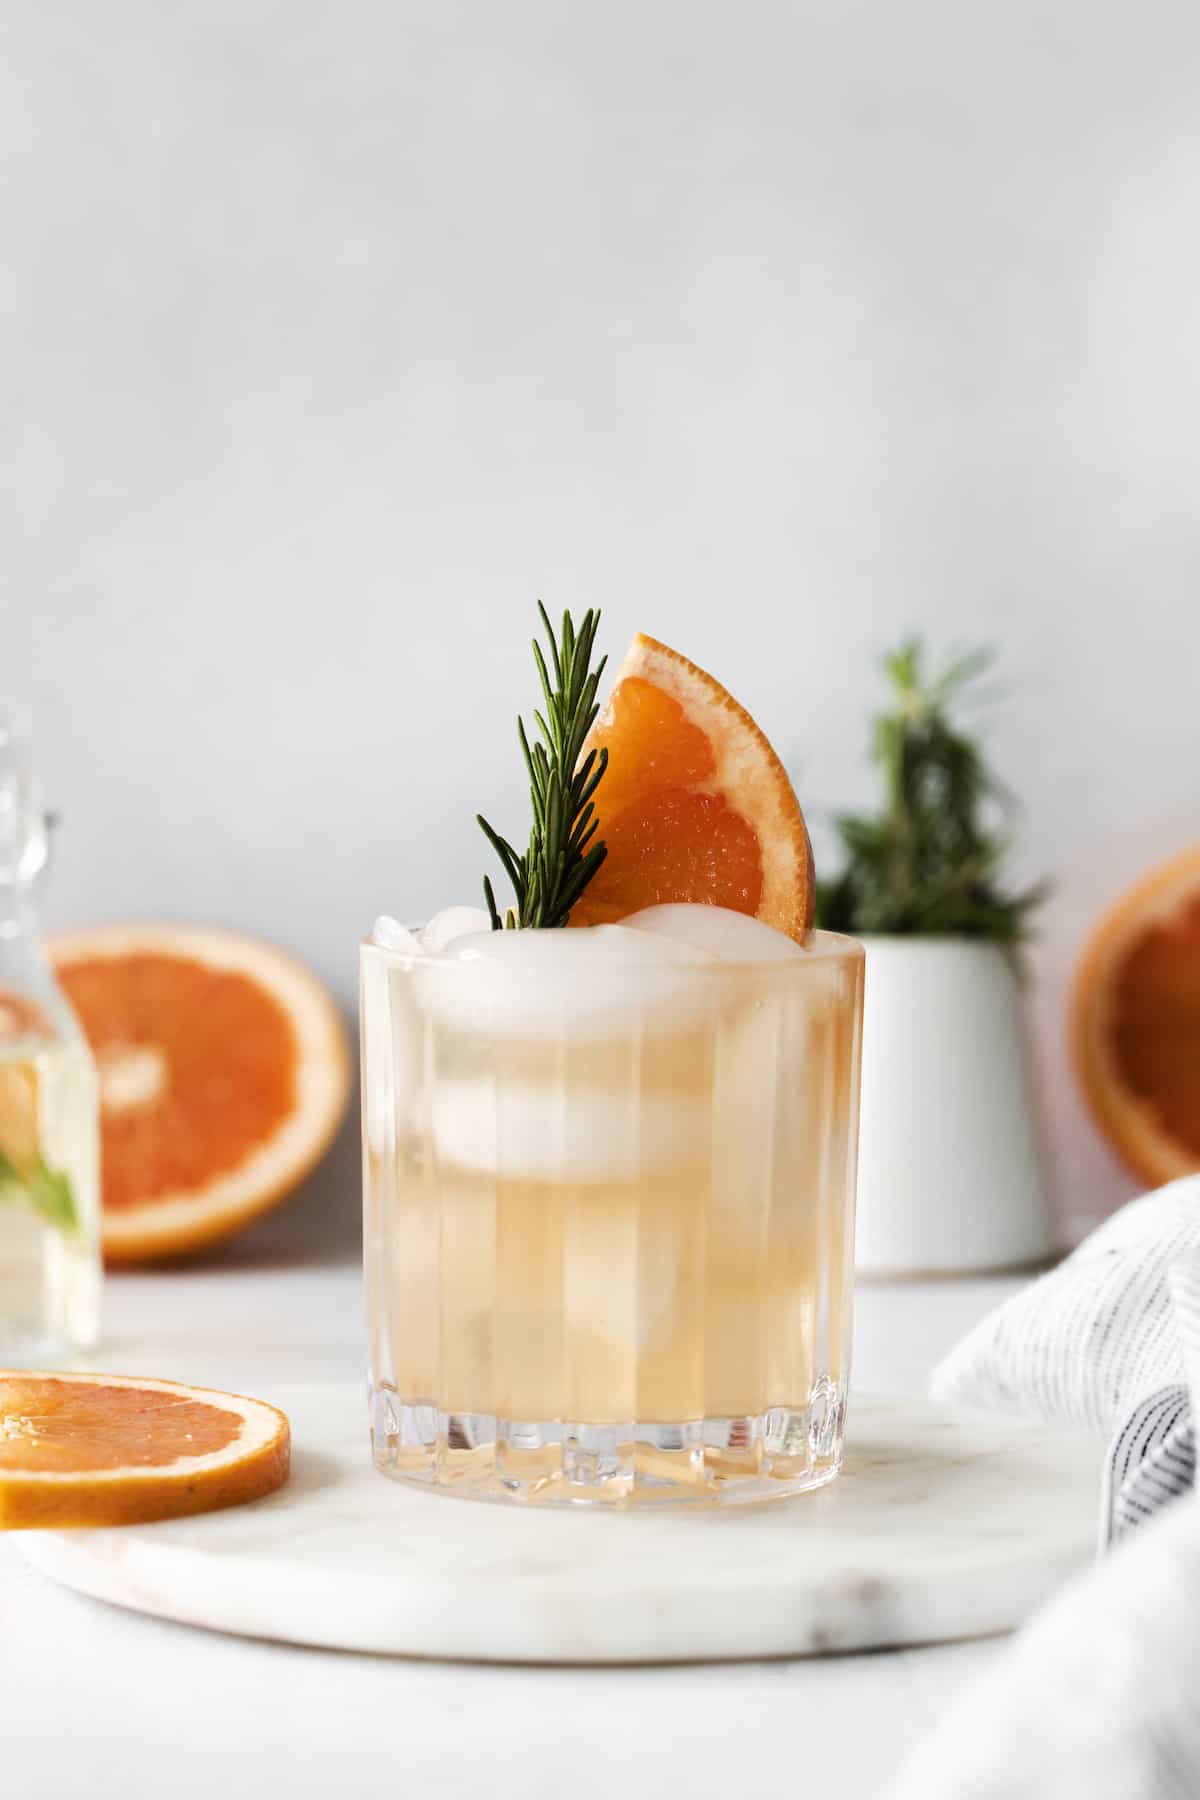 A grapefruit cocktail with rosemary in a glass